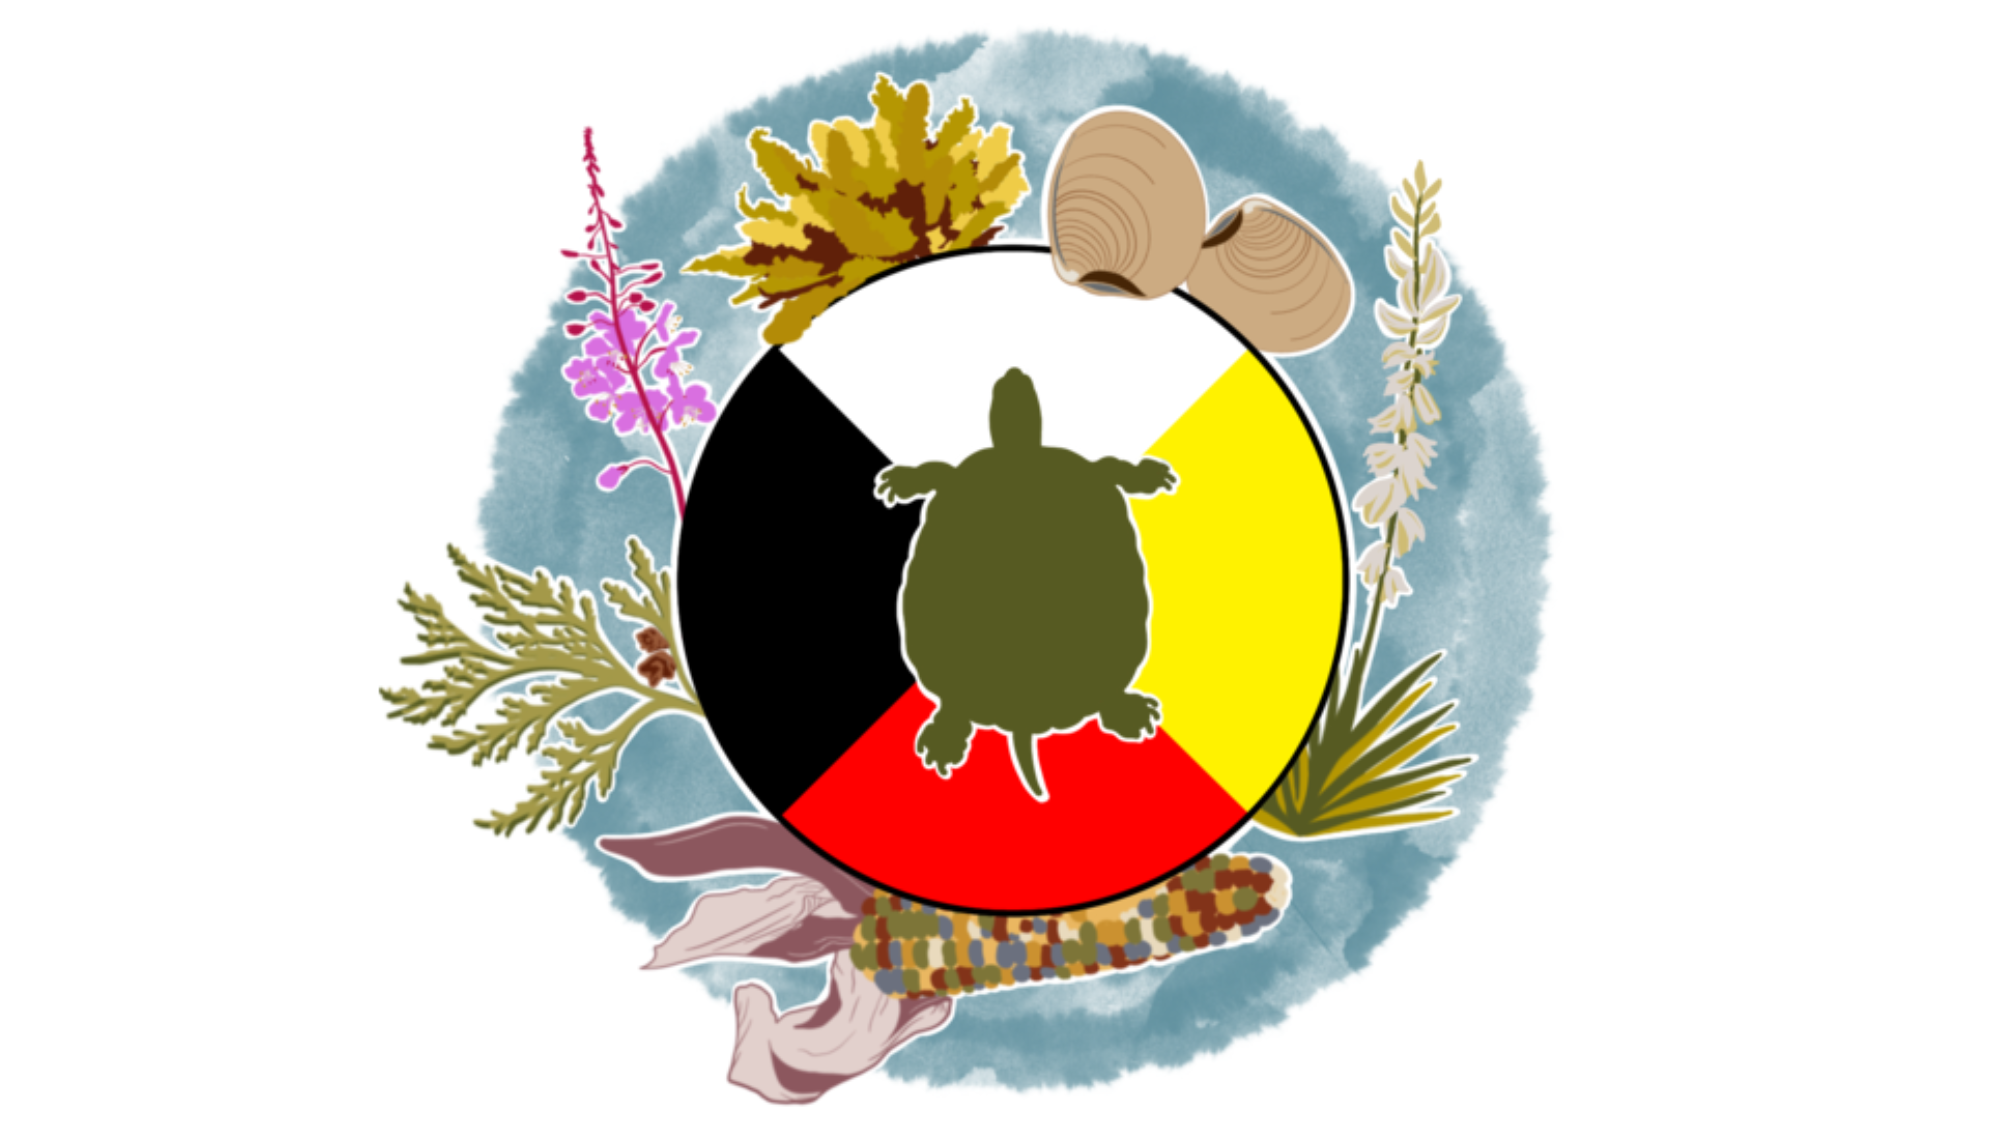 Image of a green snapping turtle within a circular medicine wheel (offset four quadrants colored white, yellow, red, and black), encircled by a wreath of plants significant to Indigenous cultures from across the US, Alaska, and the Pacific Islands (kelp, clams, yucca, corn, cedar, &amp; fire weed) and a watercolor blue border.